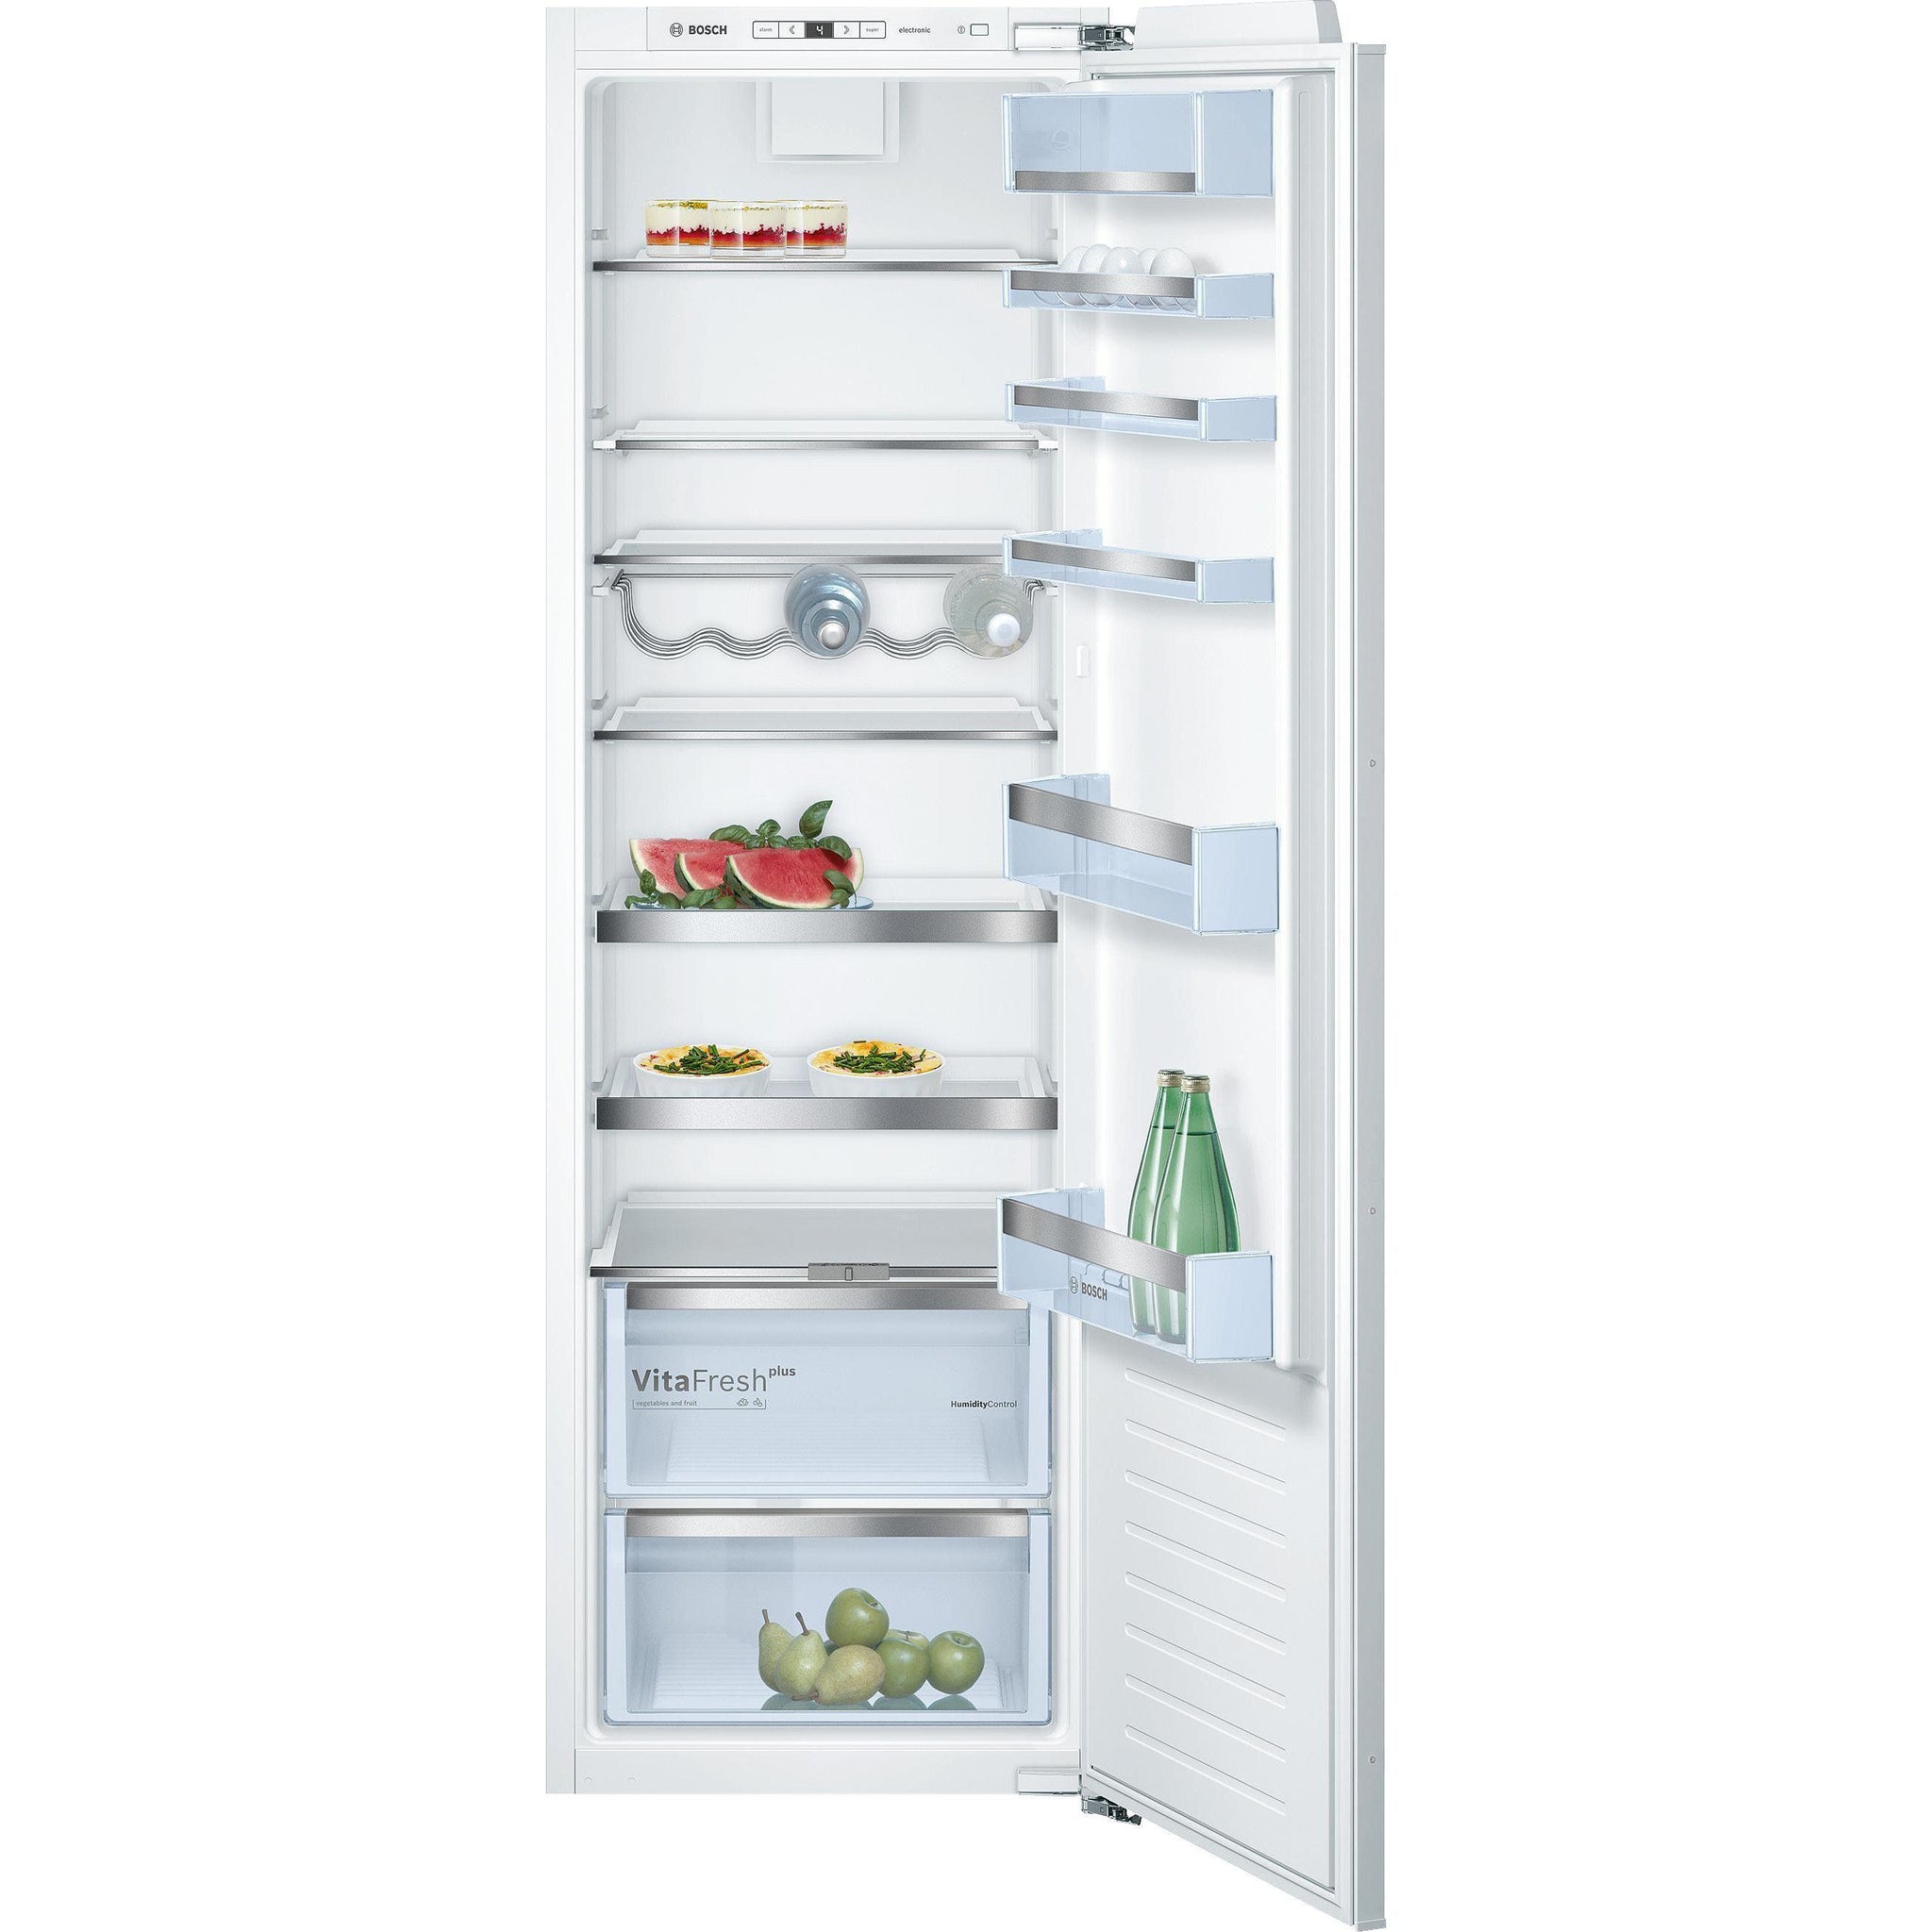 Bosch Series 6 Kir81afe0g Builtin Fridge Euronics Delivery Within 35 Days